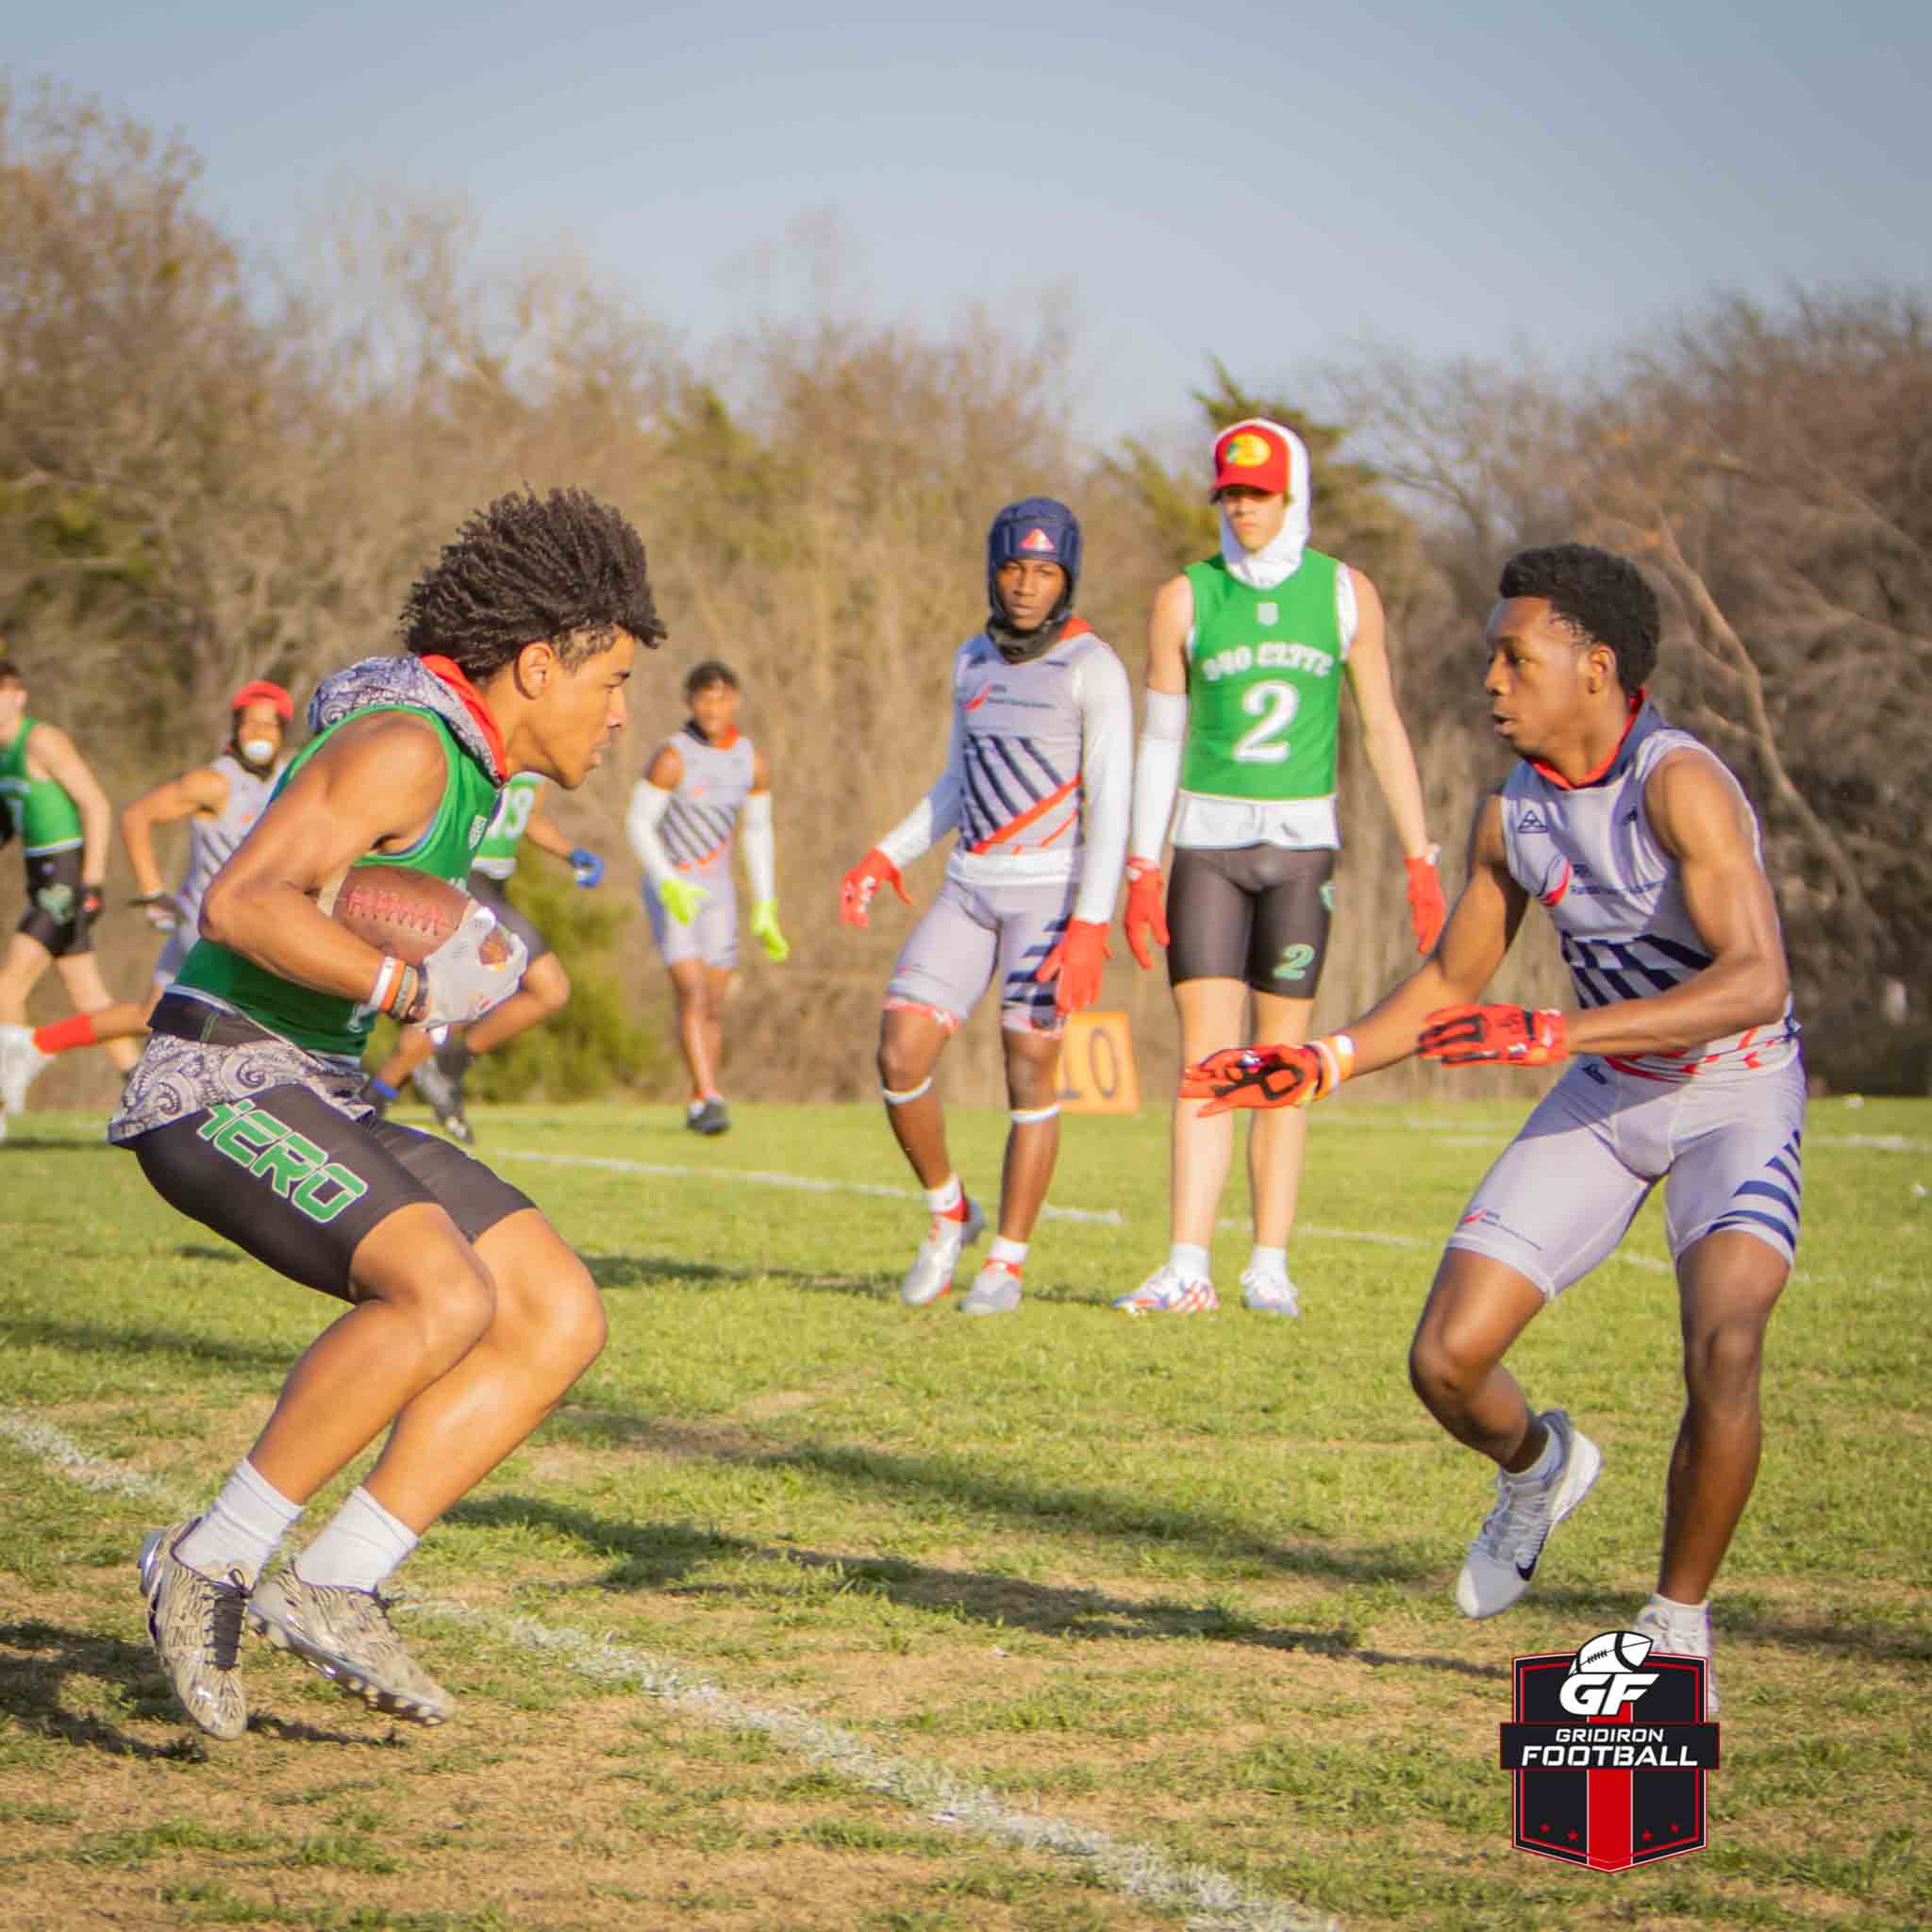 Randall Passing Academy and 940 Elite Battle in Dallas